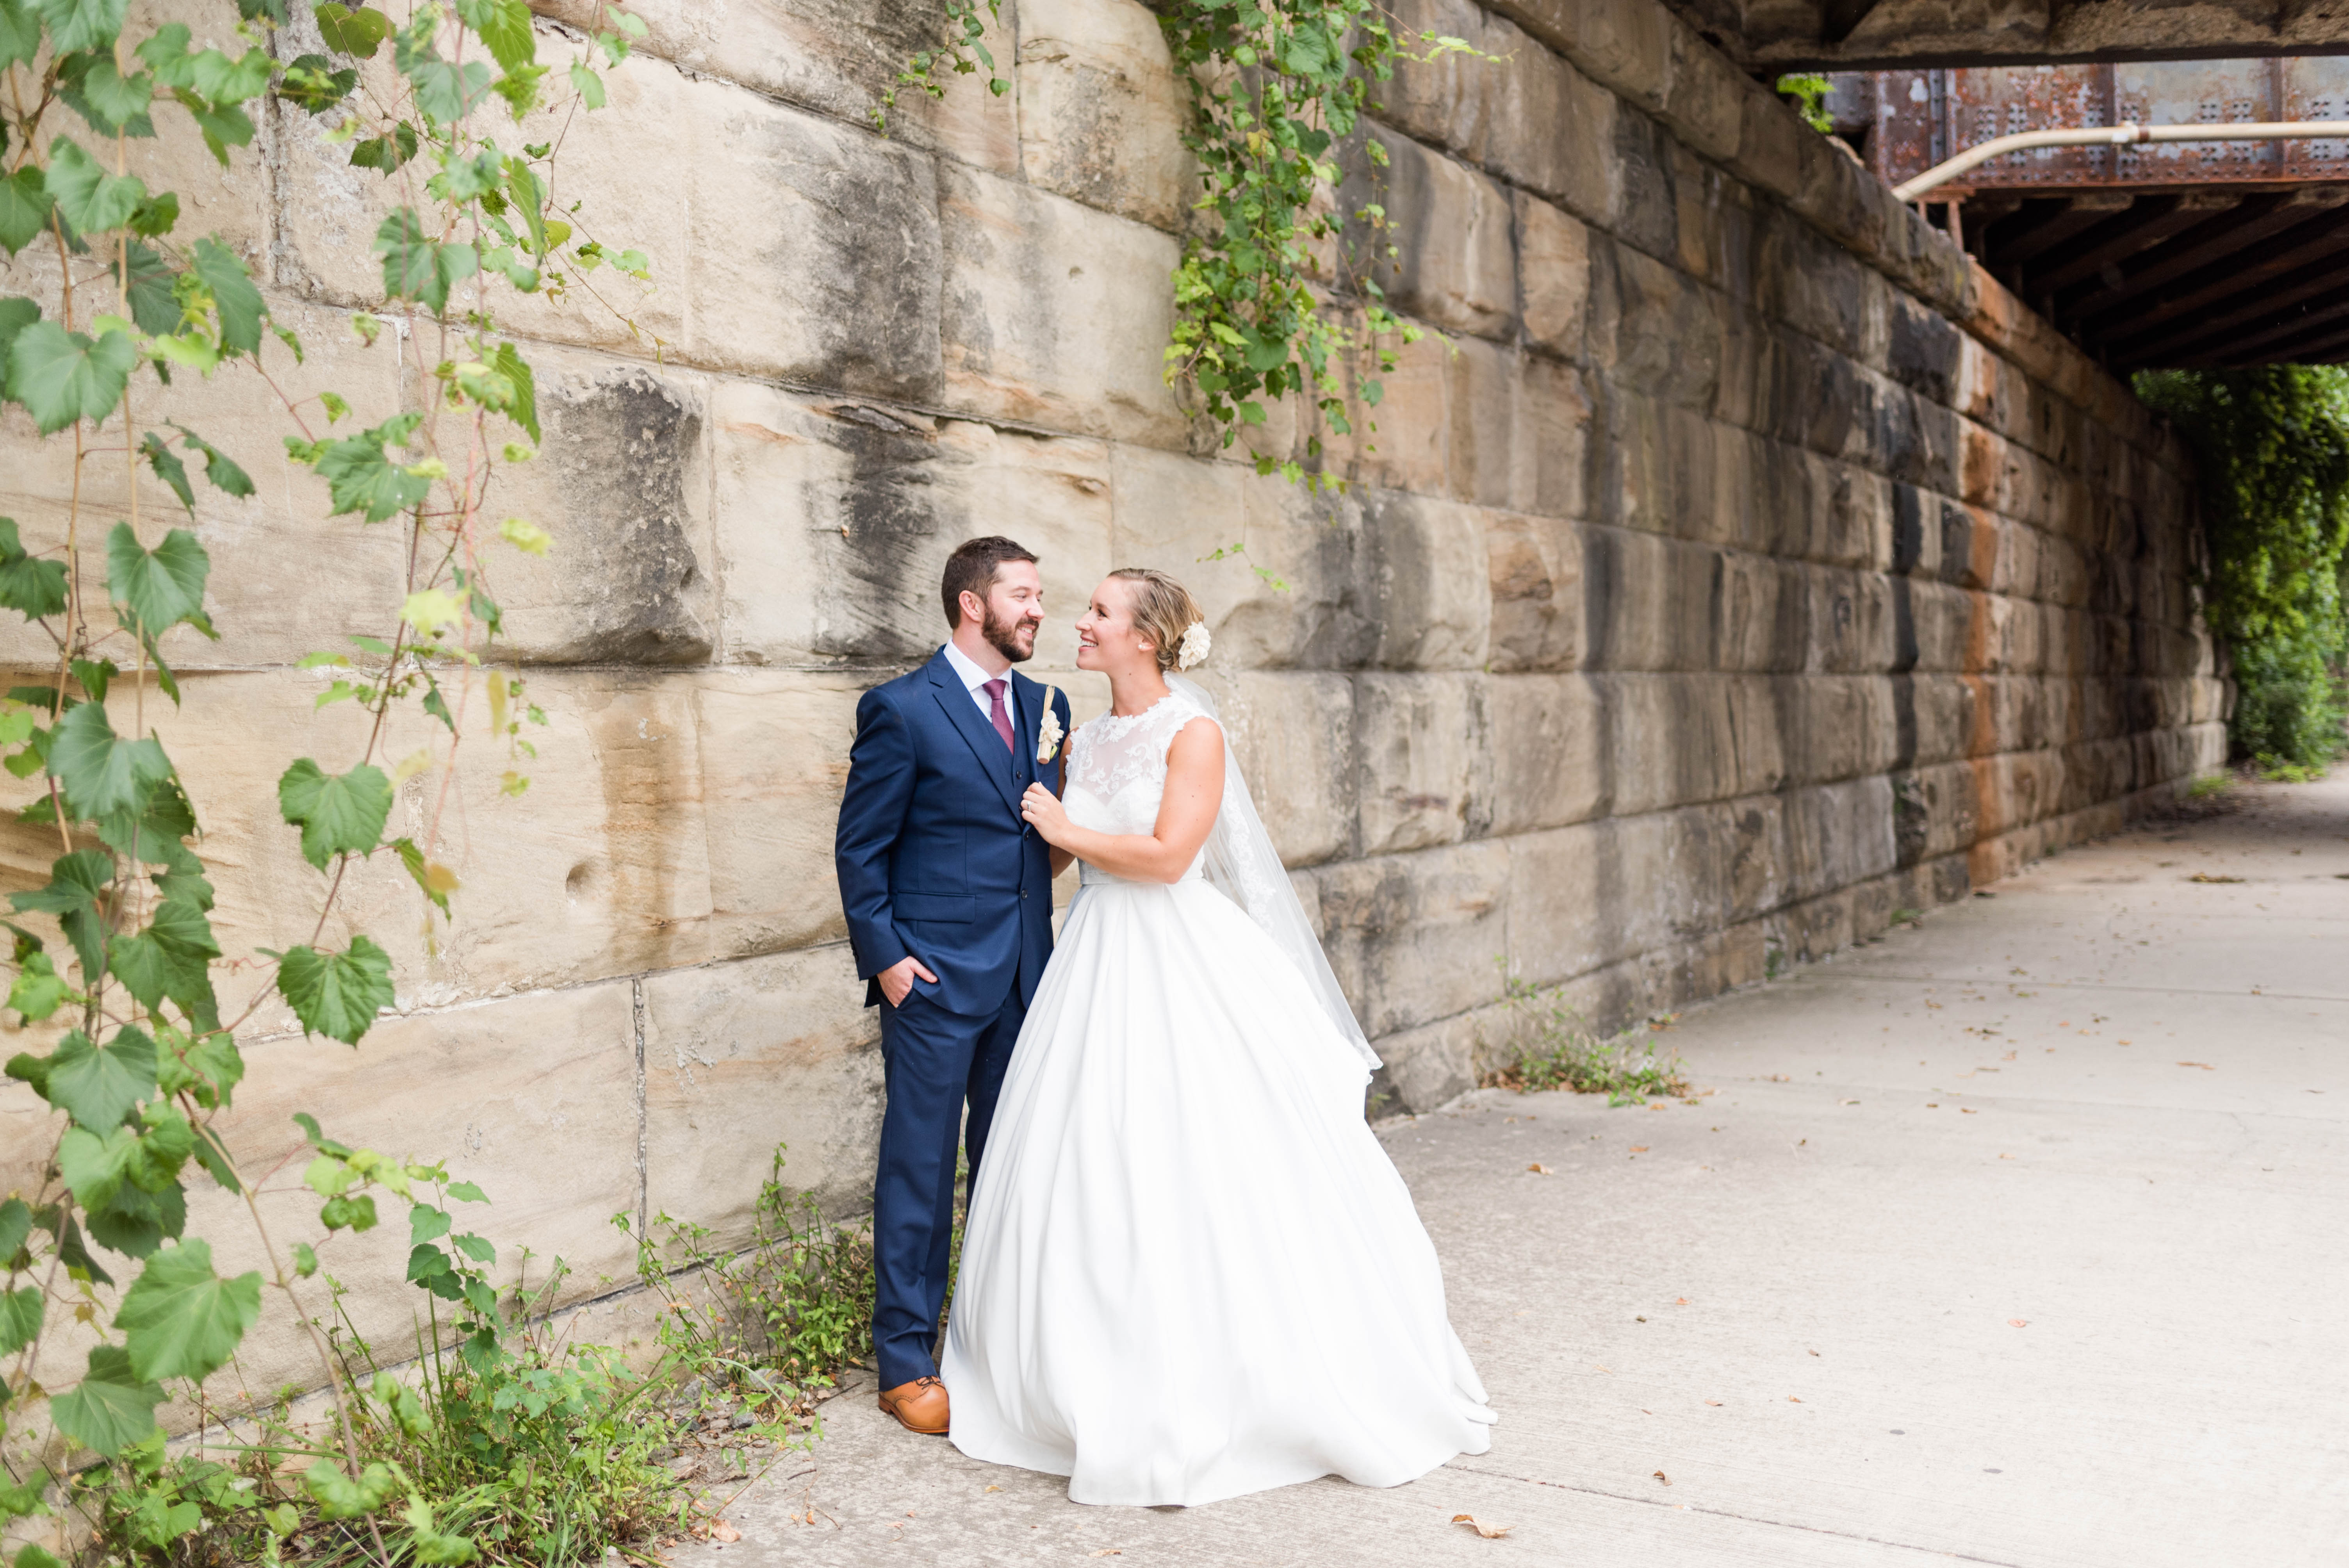 Fall Wedding At Strongwater Columbus: Ally and Micah - Sweet Williams Photography, Nashville & Columbus